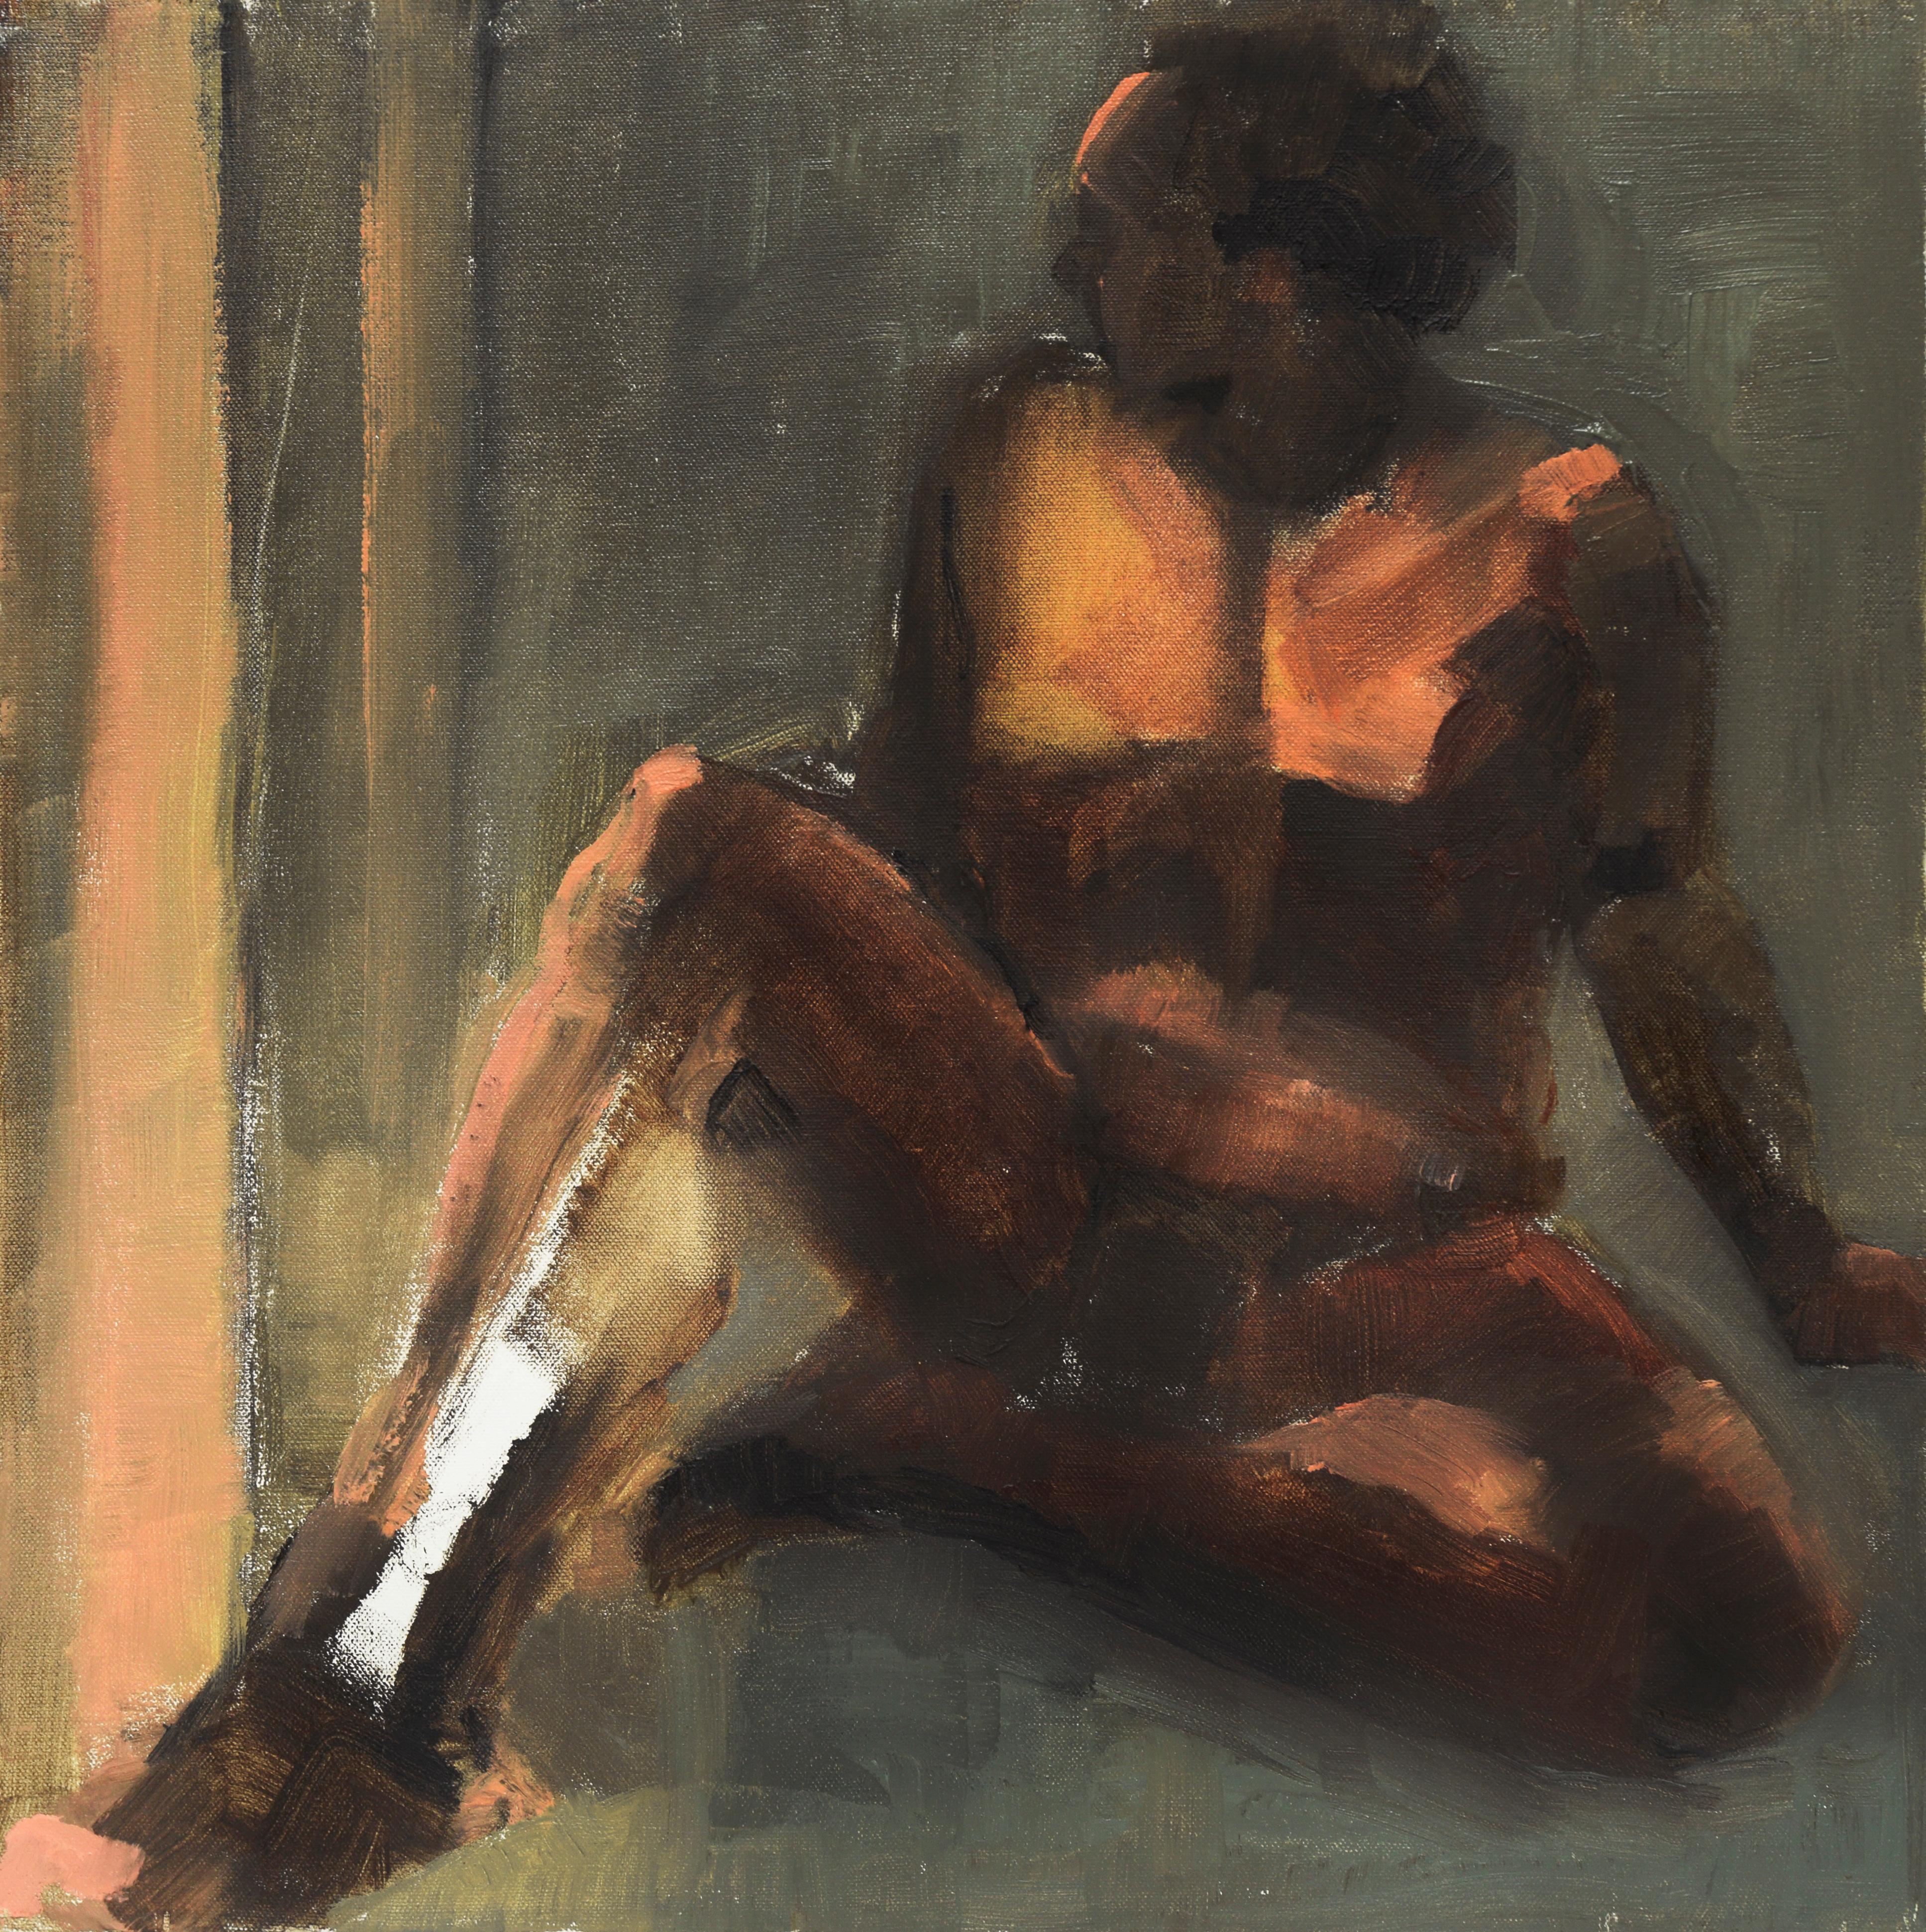 Bay Area Figurative Nude Study - Oil On Canvas - Painting by Sumrall